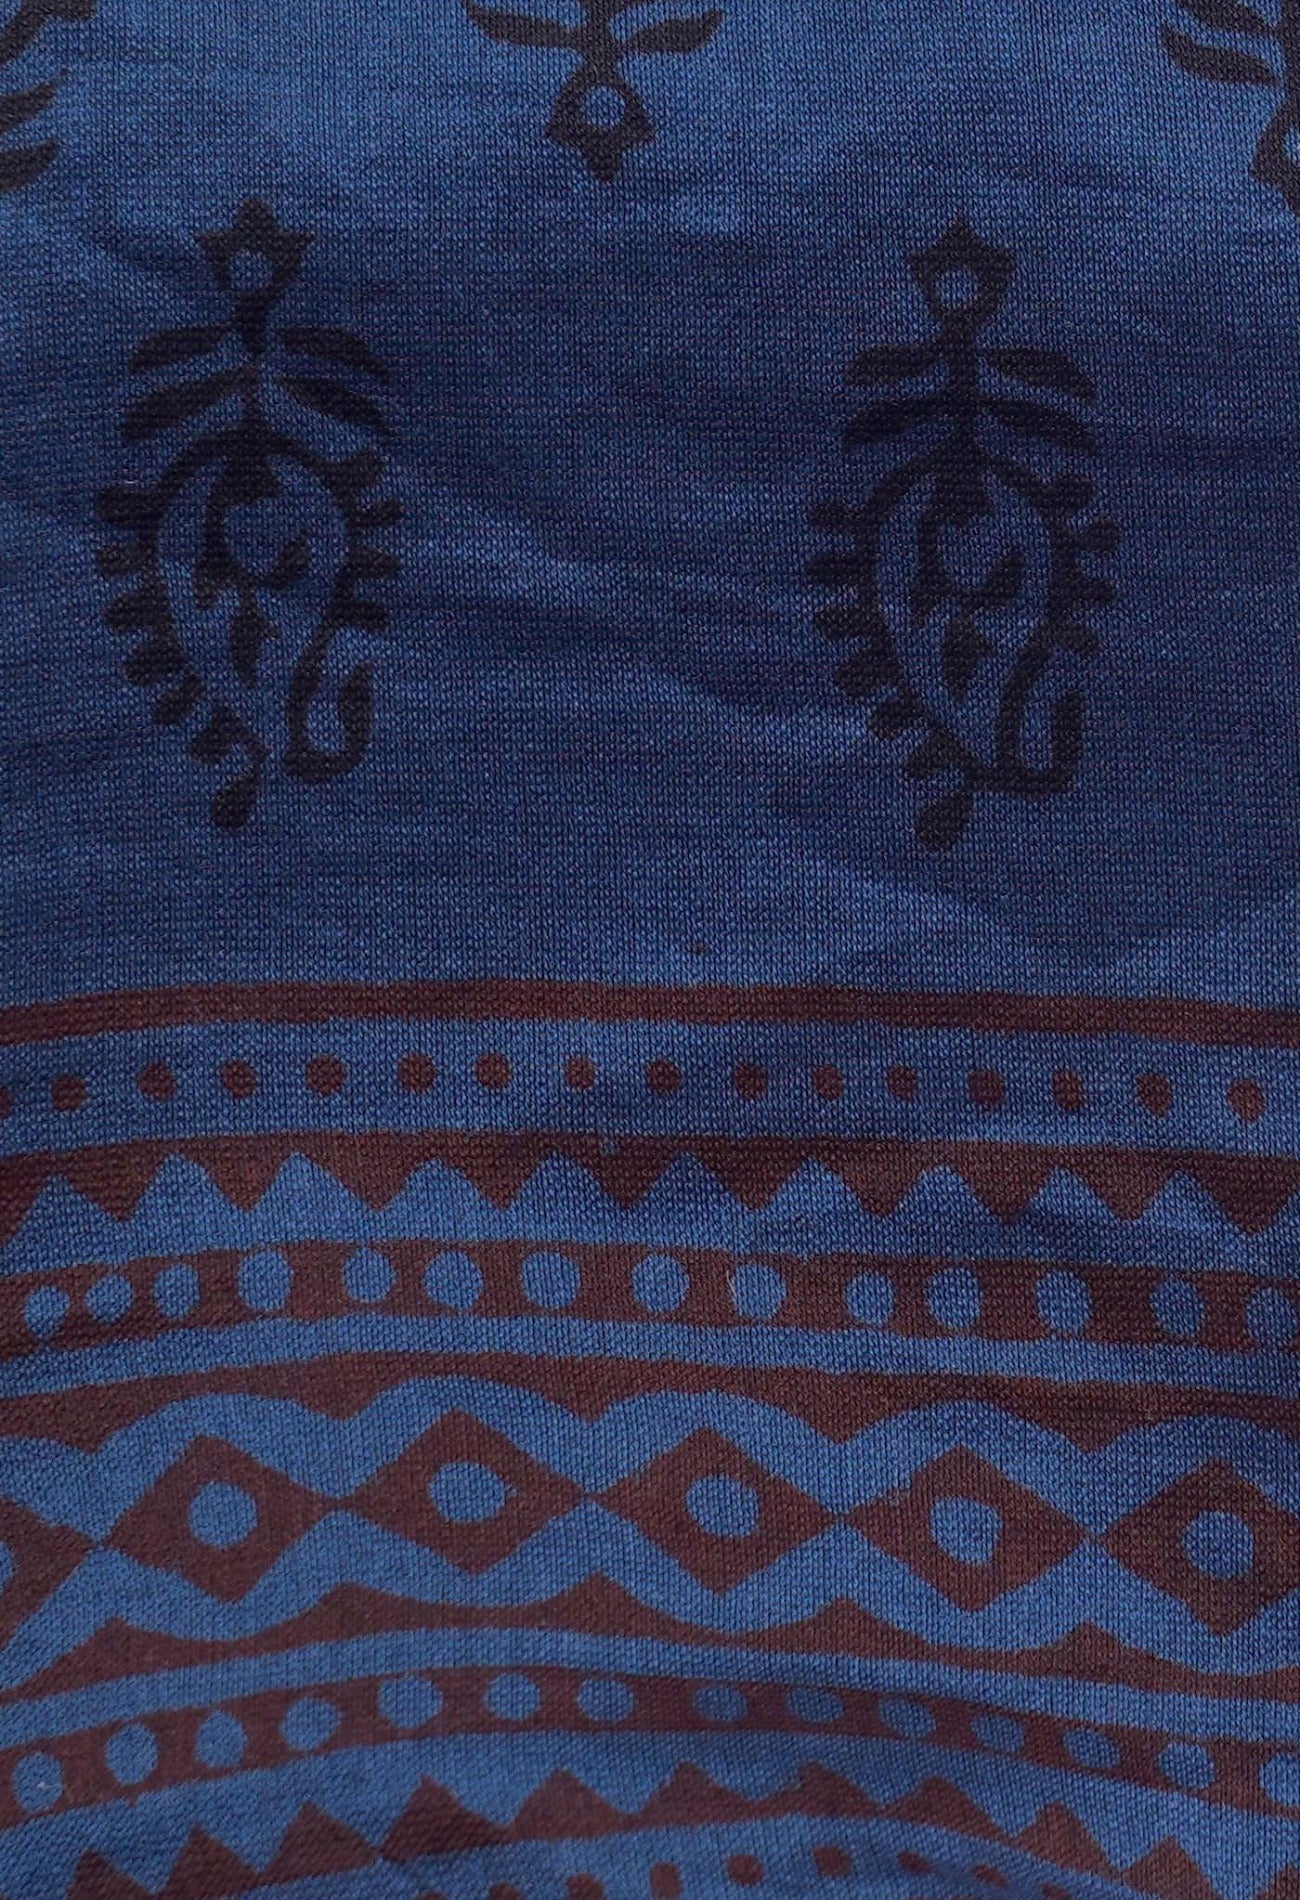 Online Shopping for Blue Pure Bagh Chanderi Cotton Saree with Hand Block Prints from Tamil Nadu at Unnatisilks.com India
